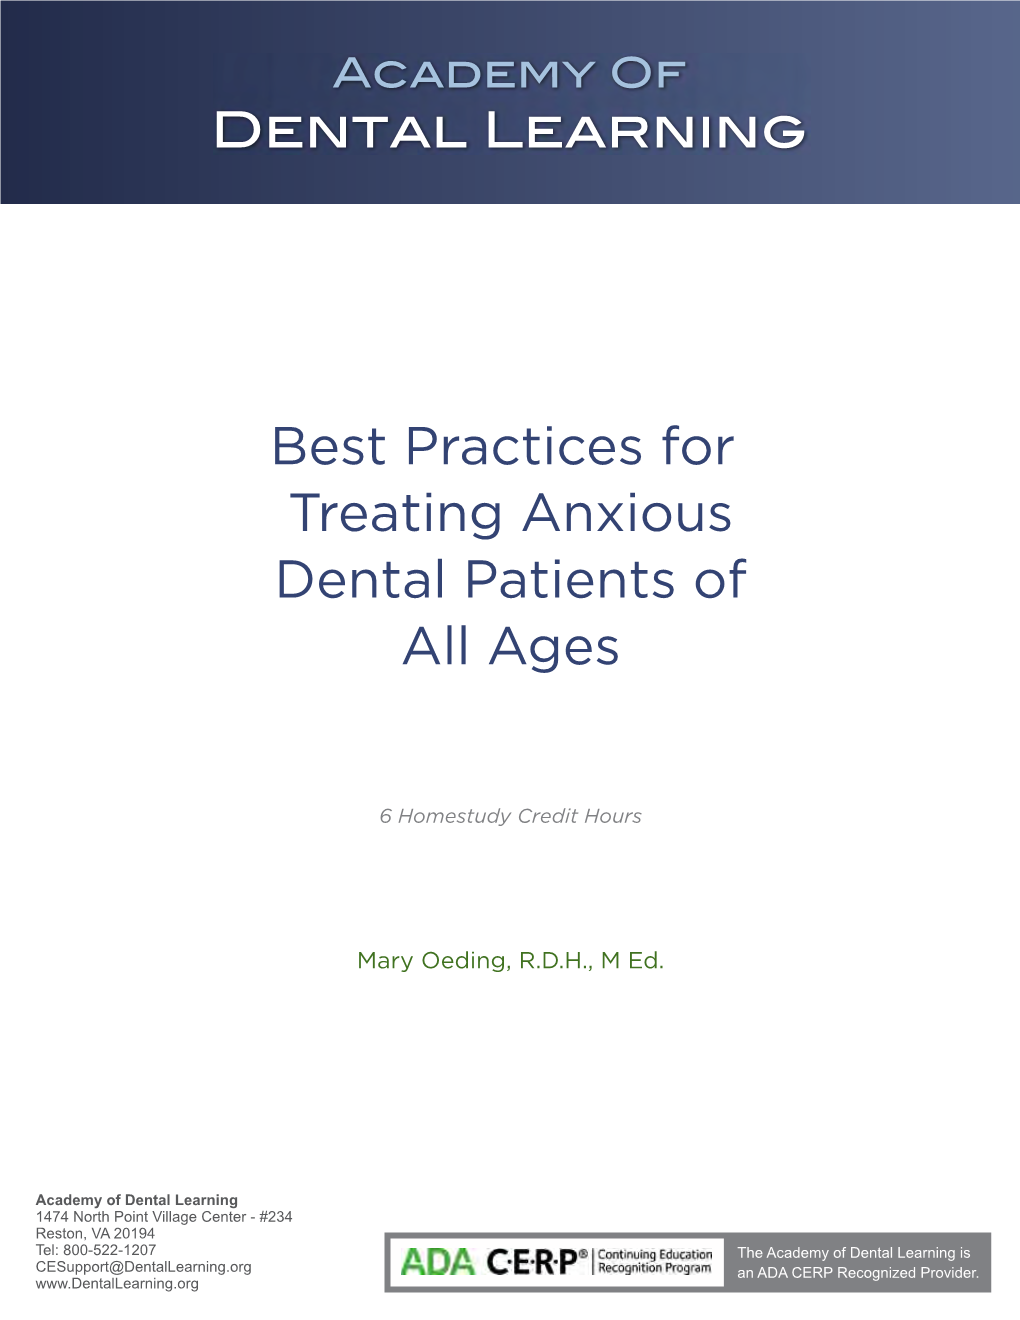 Best Practices for Treating Anxious Dental Patients of All Ages